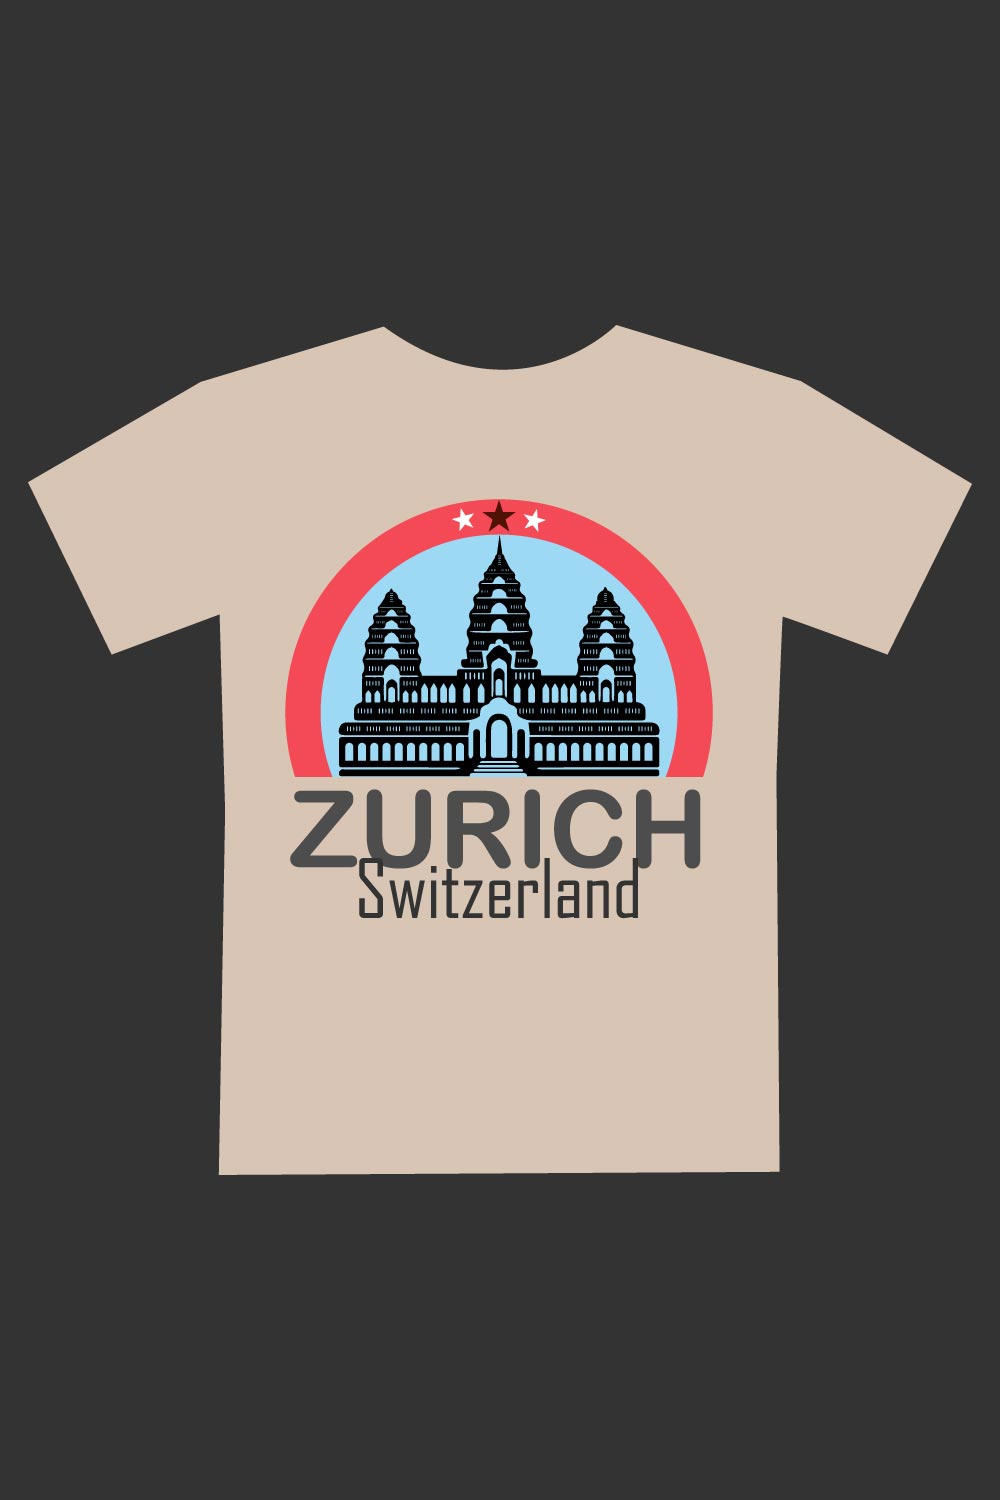 For a festival in Zurich, Switzerland, you might want your T-shirt design to capture the essence of the city and the event pinterest preview image.